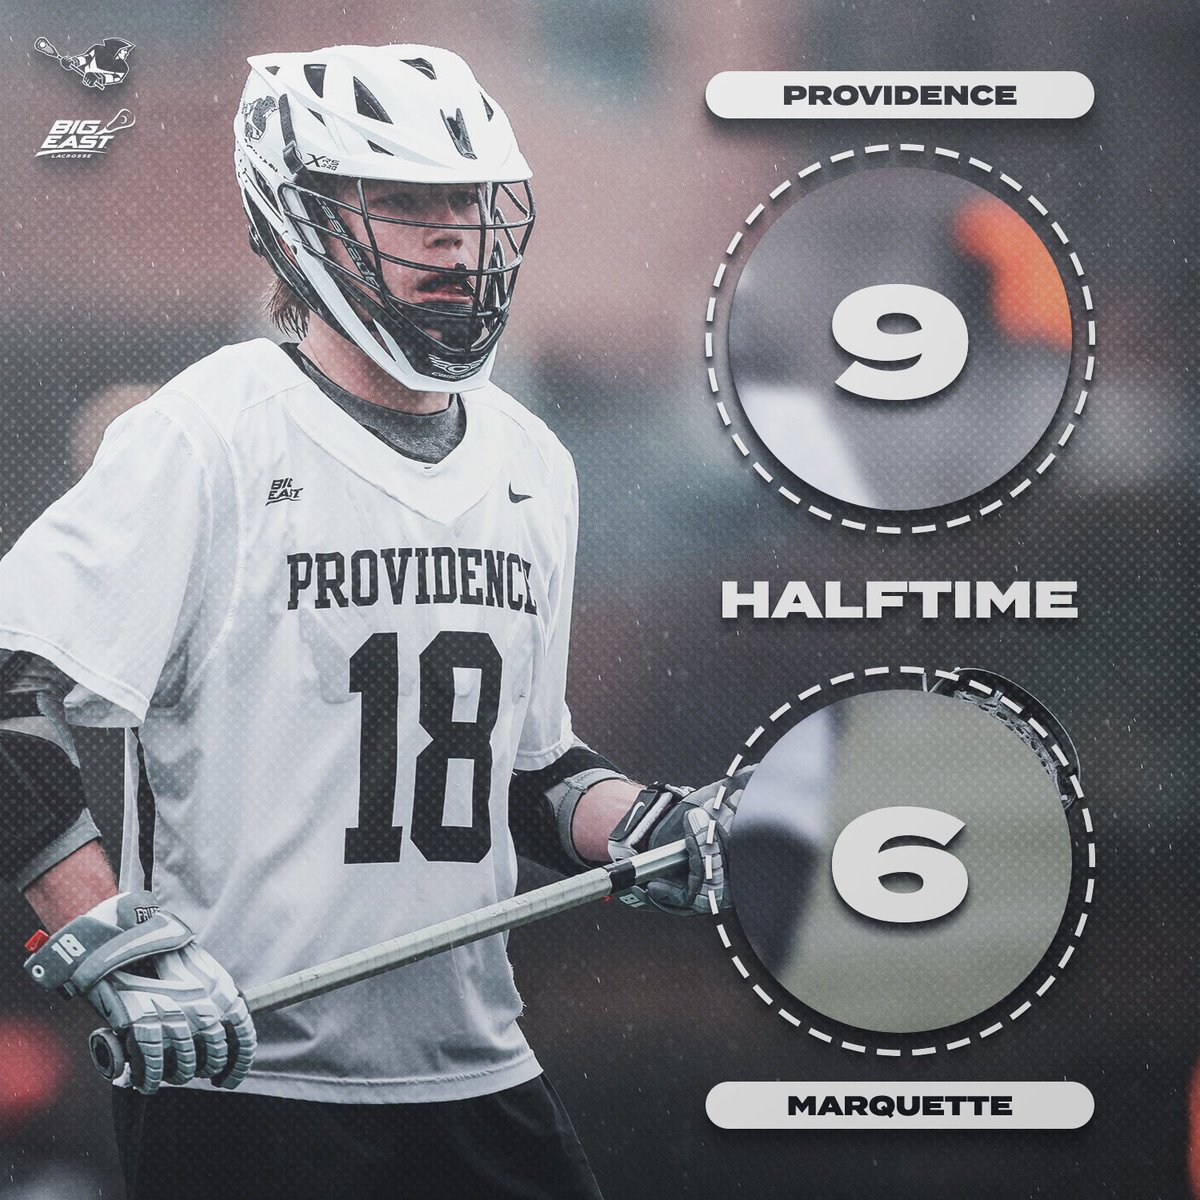 Halftime: Providence 9, Marquette 6